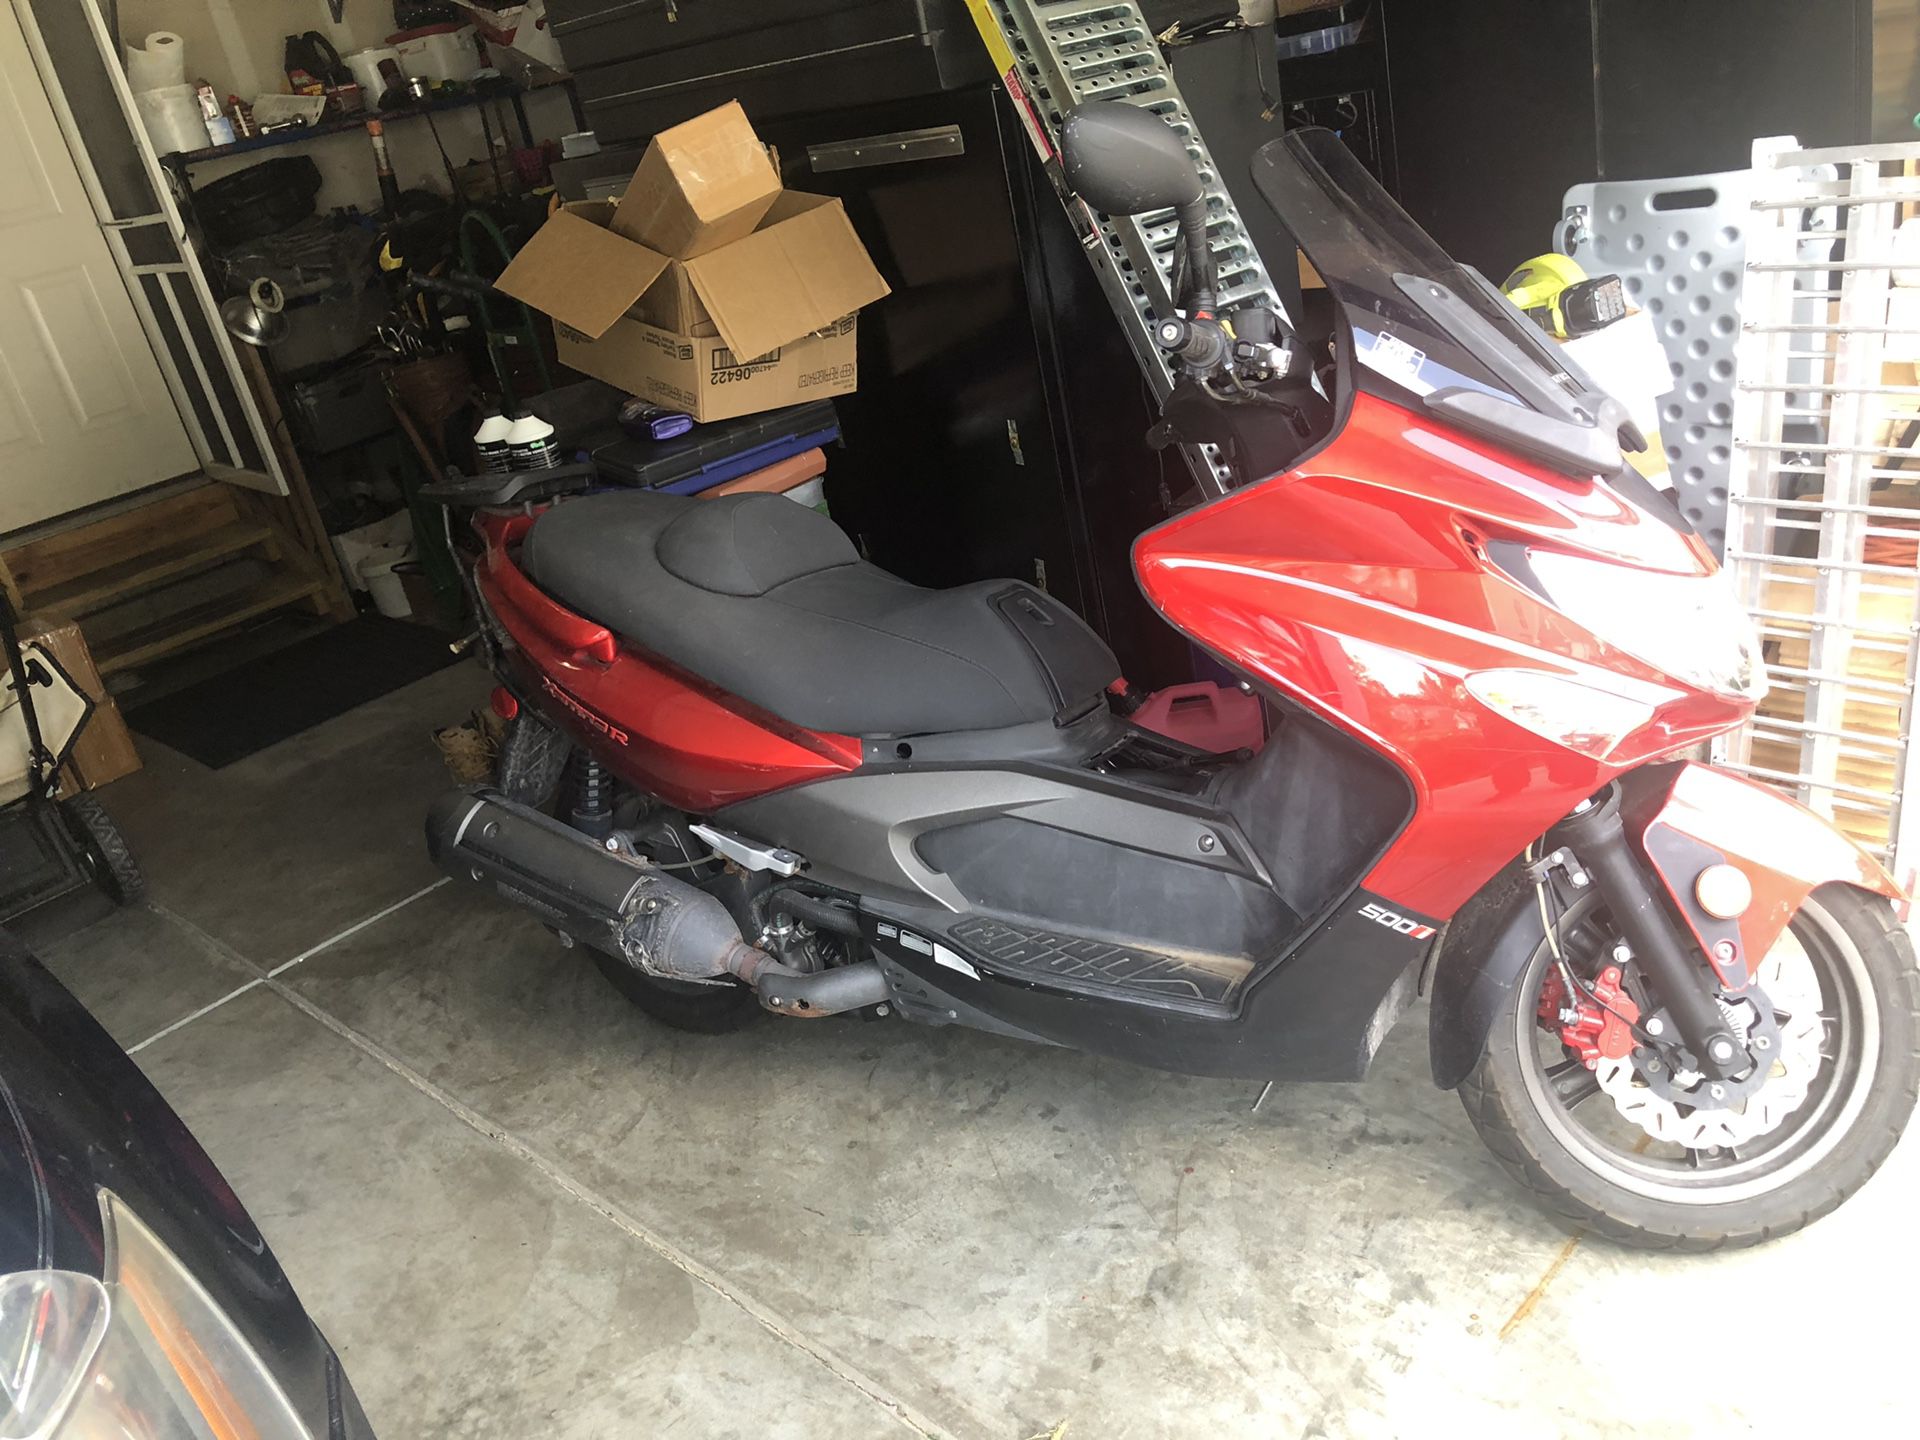 2010 Kymco 500 RI scooter No title 11,000 miles